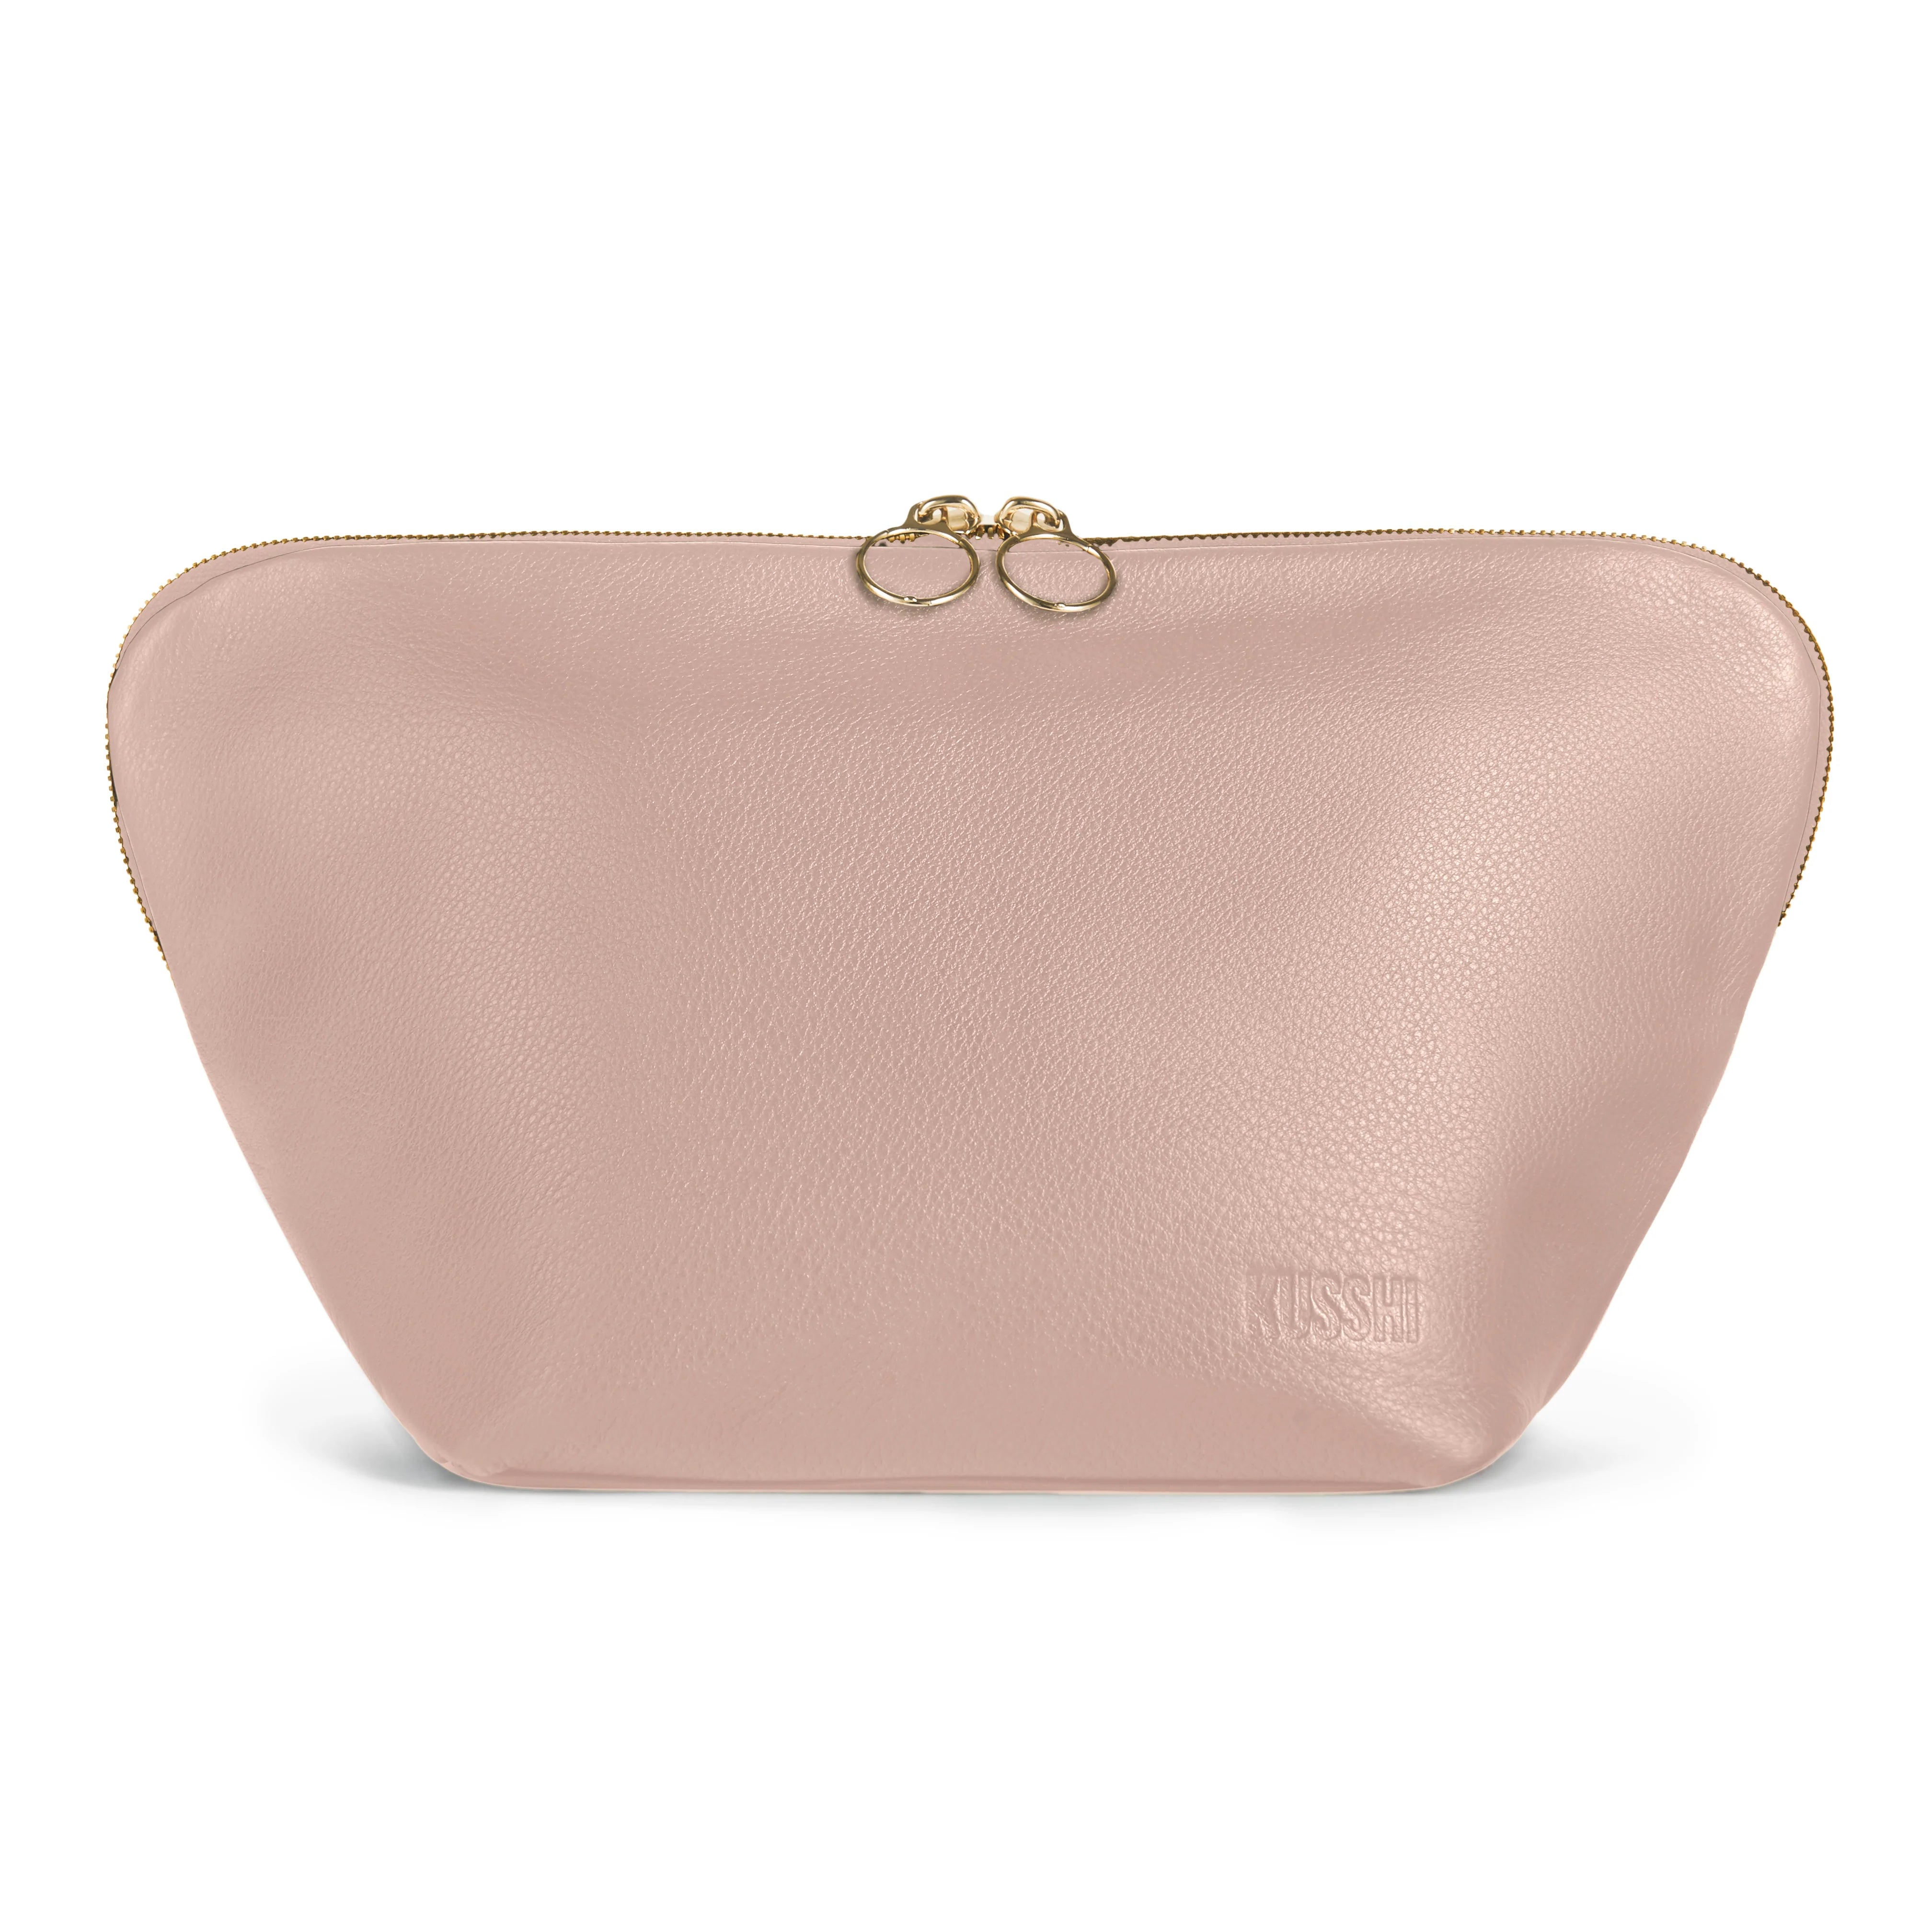 KUSSHI Vacationer Makeup Bag Leather Blush Pink with Cool Grey Interior